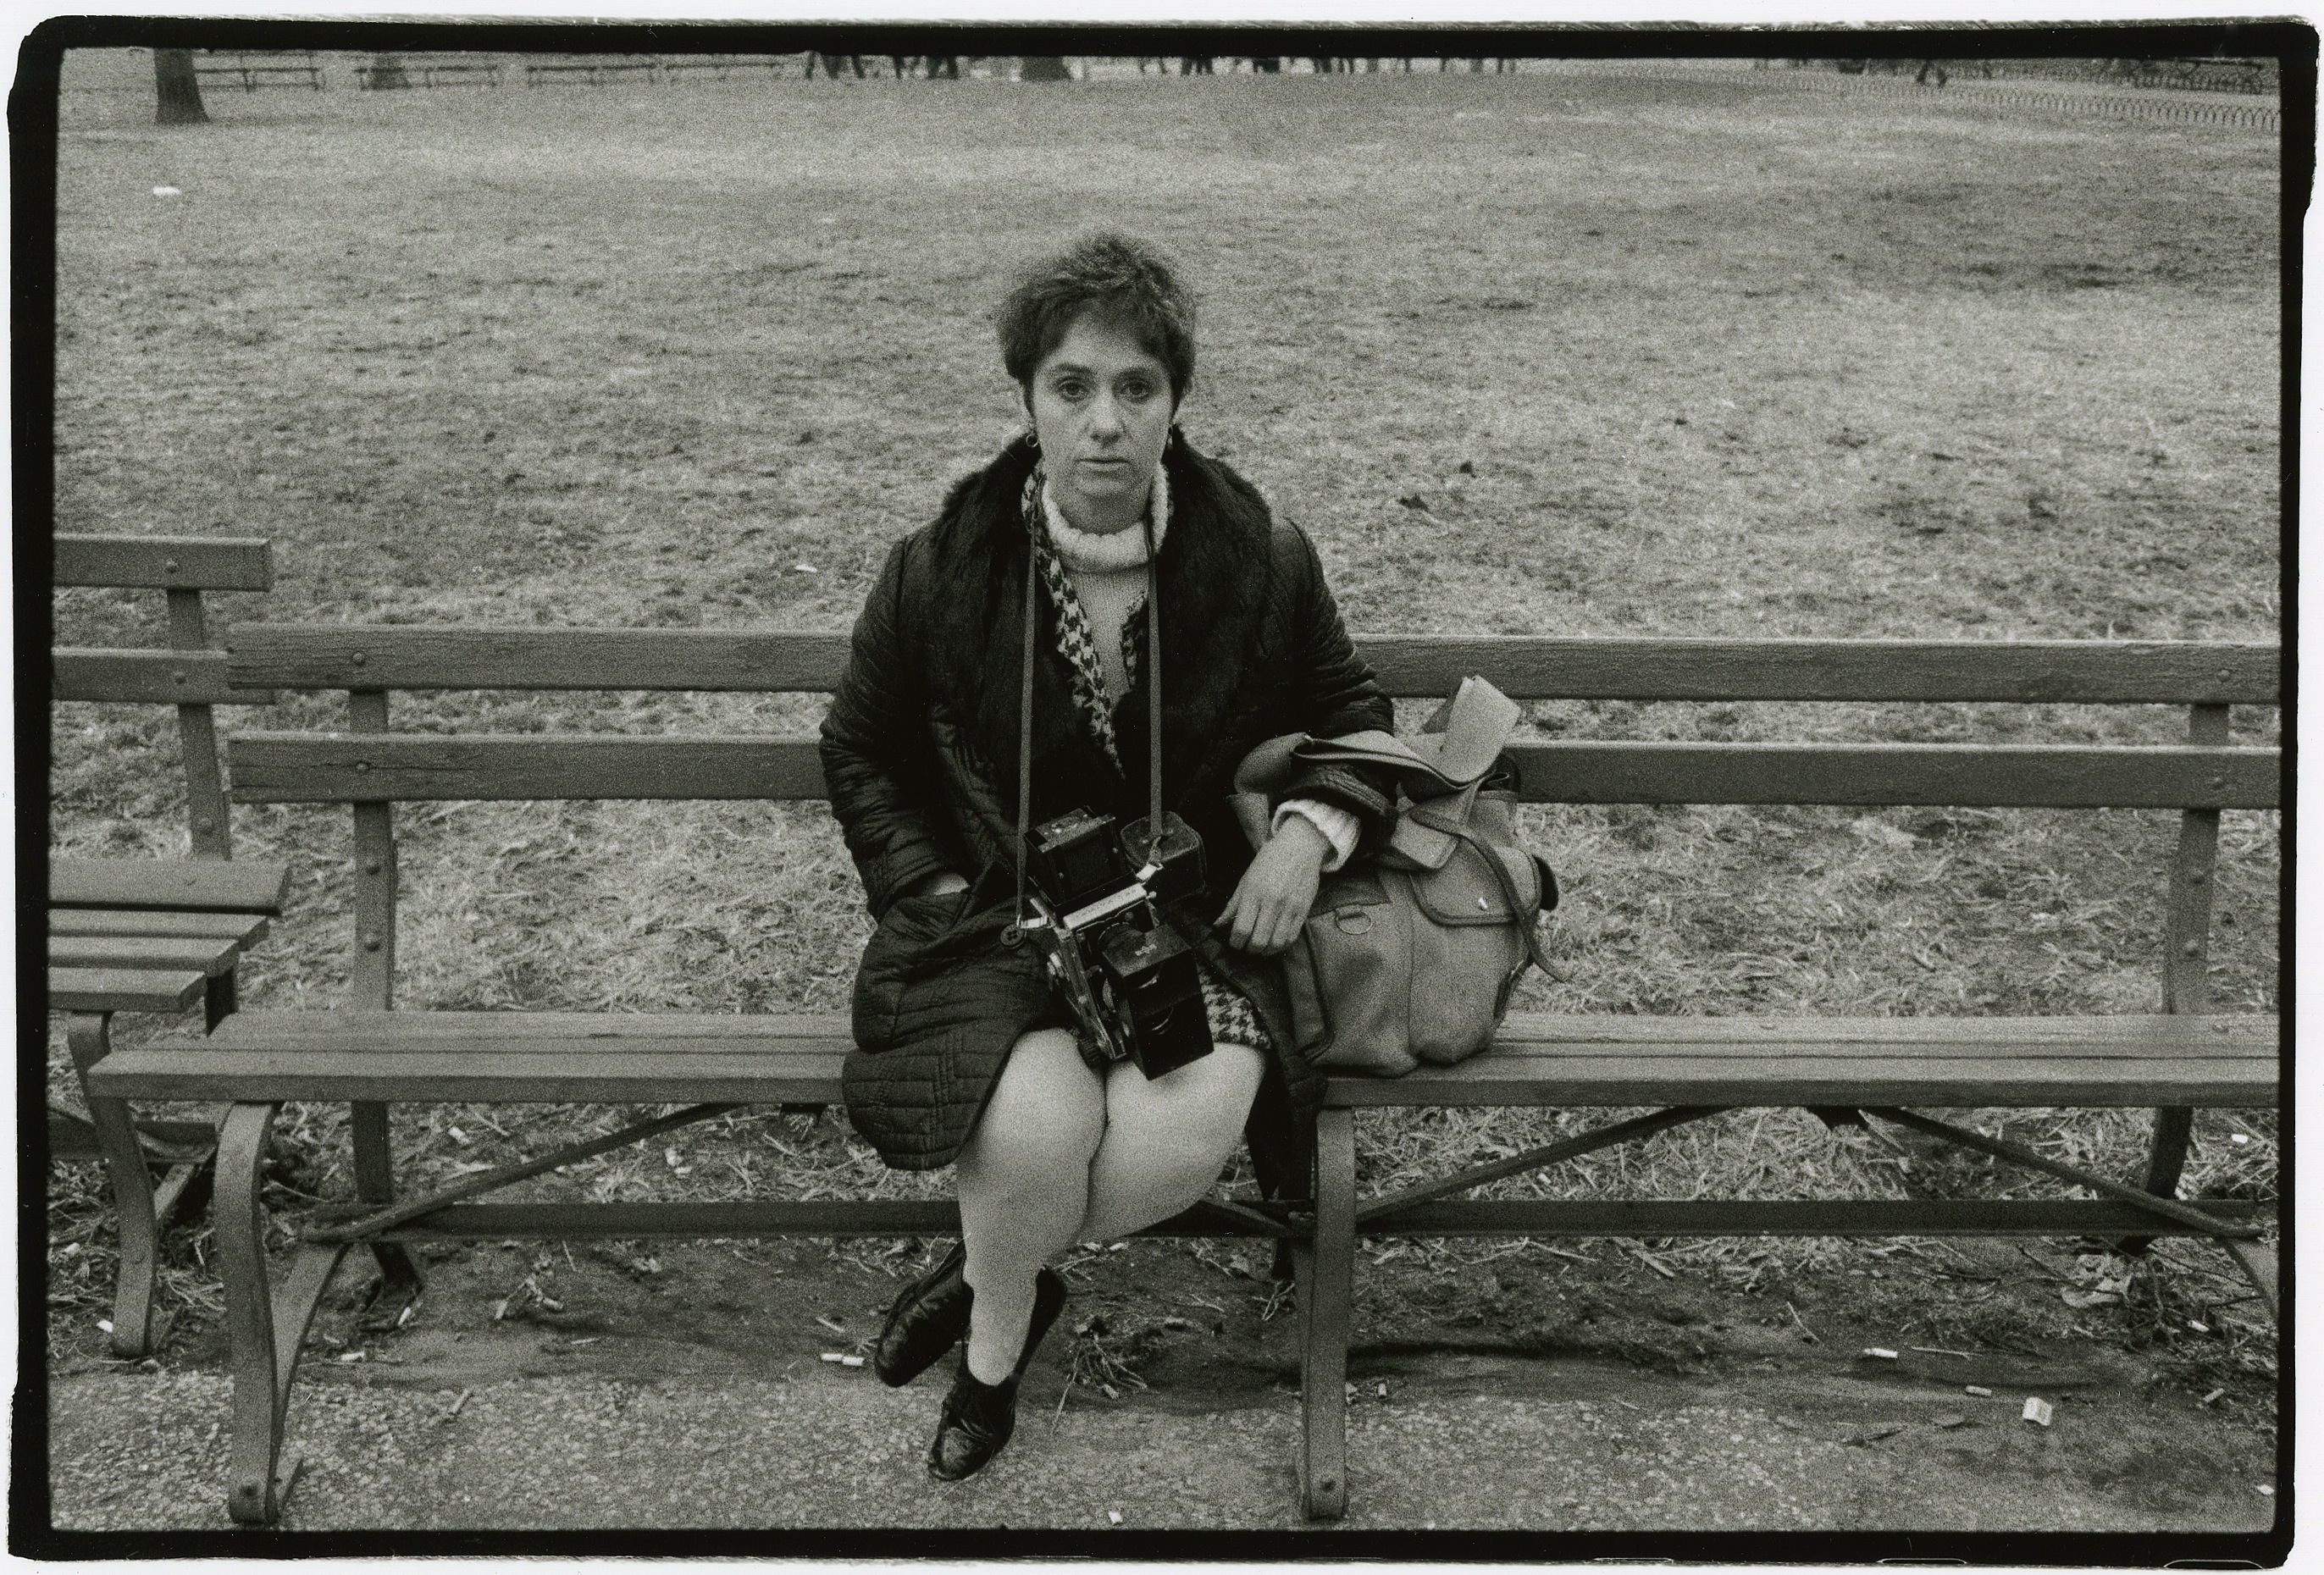 Diane Arbus: Finding Beauty in the Odd